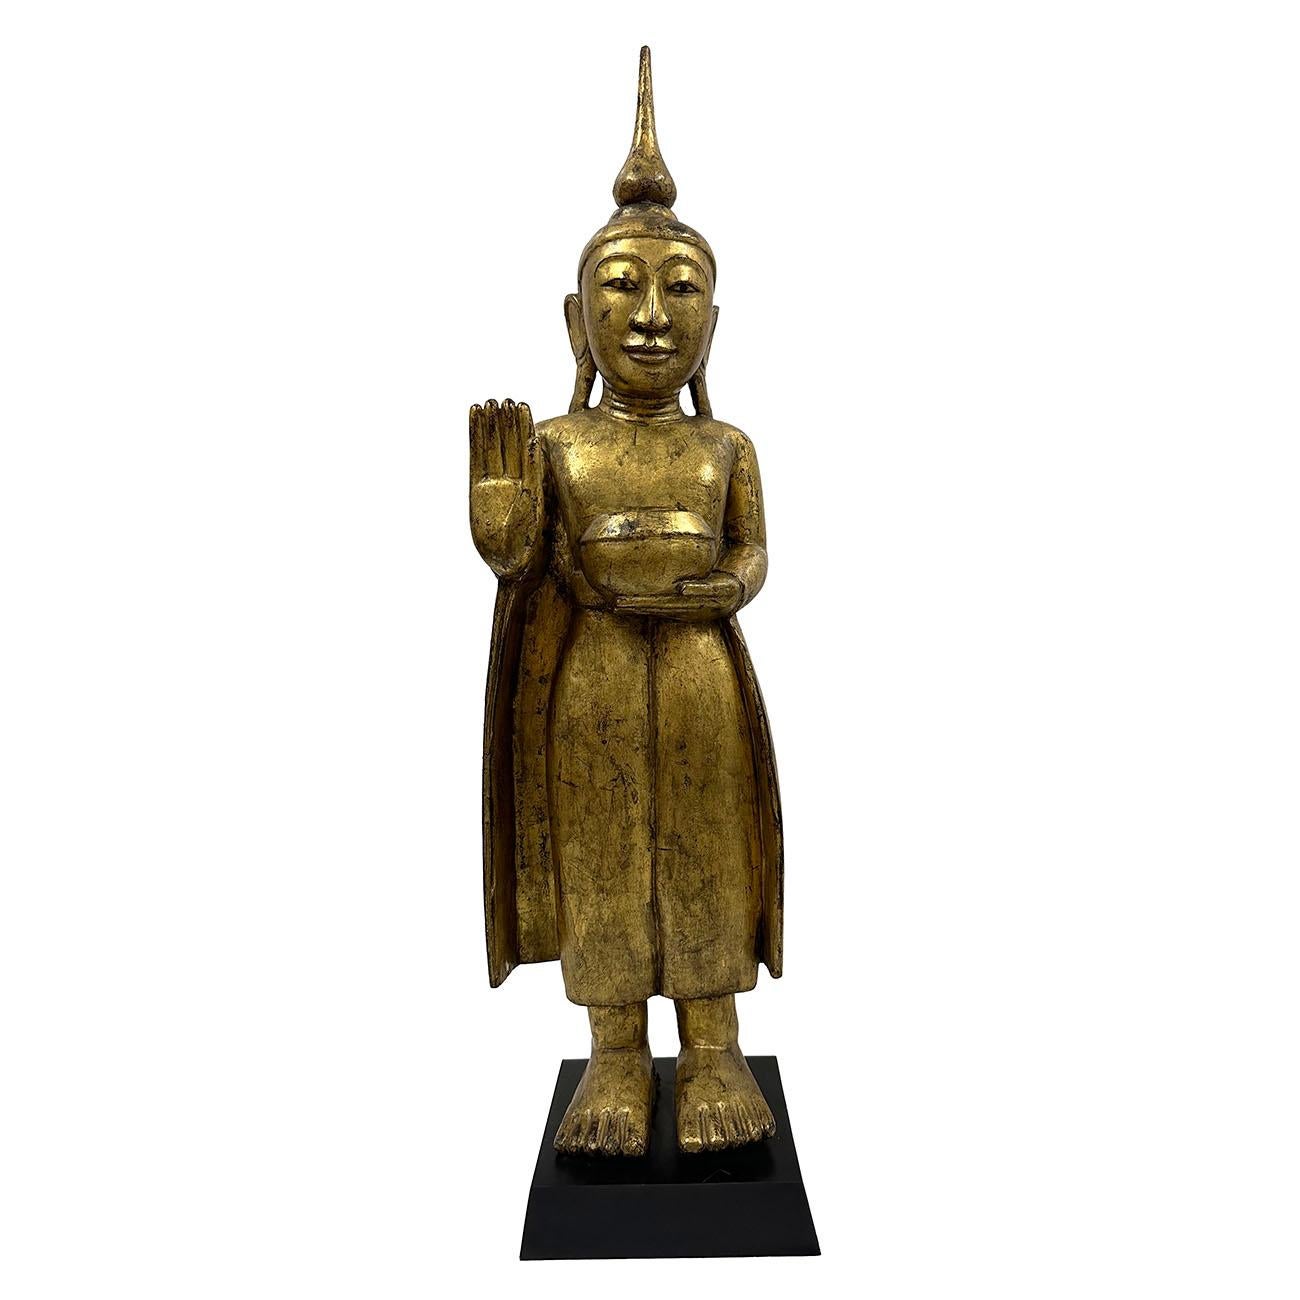 Set of 4 Thai hand carved wooden standing Buddha set on display stands. Beautifully carved and gilt in details. Dated Mid-20th Century. Great addition to any collection or eye-catching accent pieces.

Size: 32in H x 8.5in W x 7in D
25in H x 6.5in W